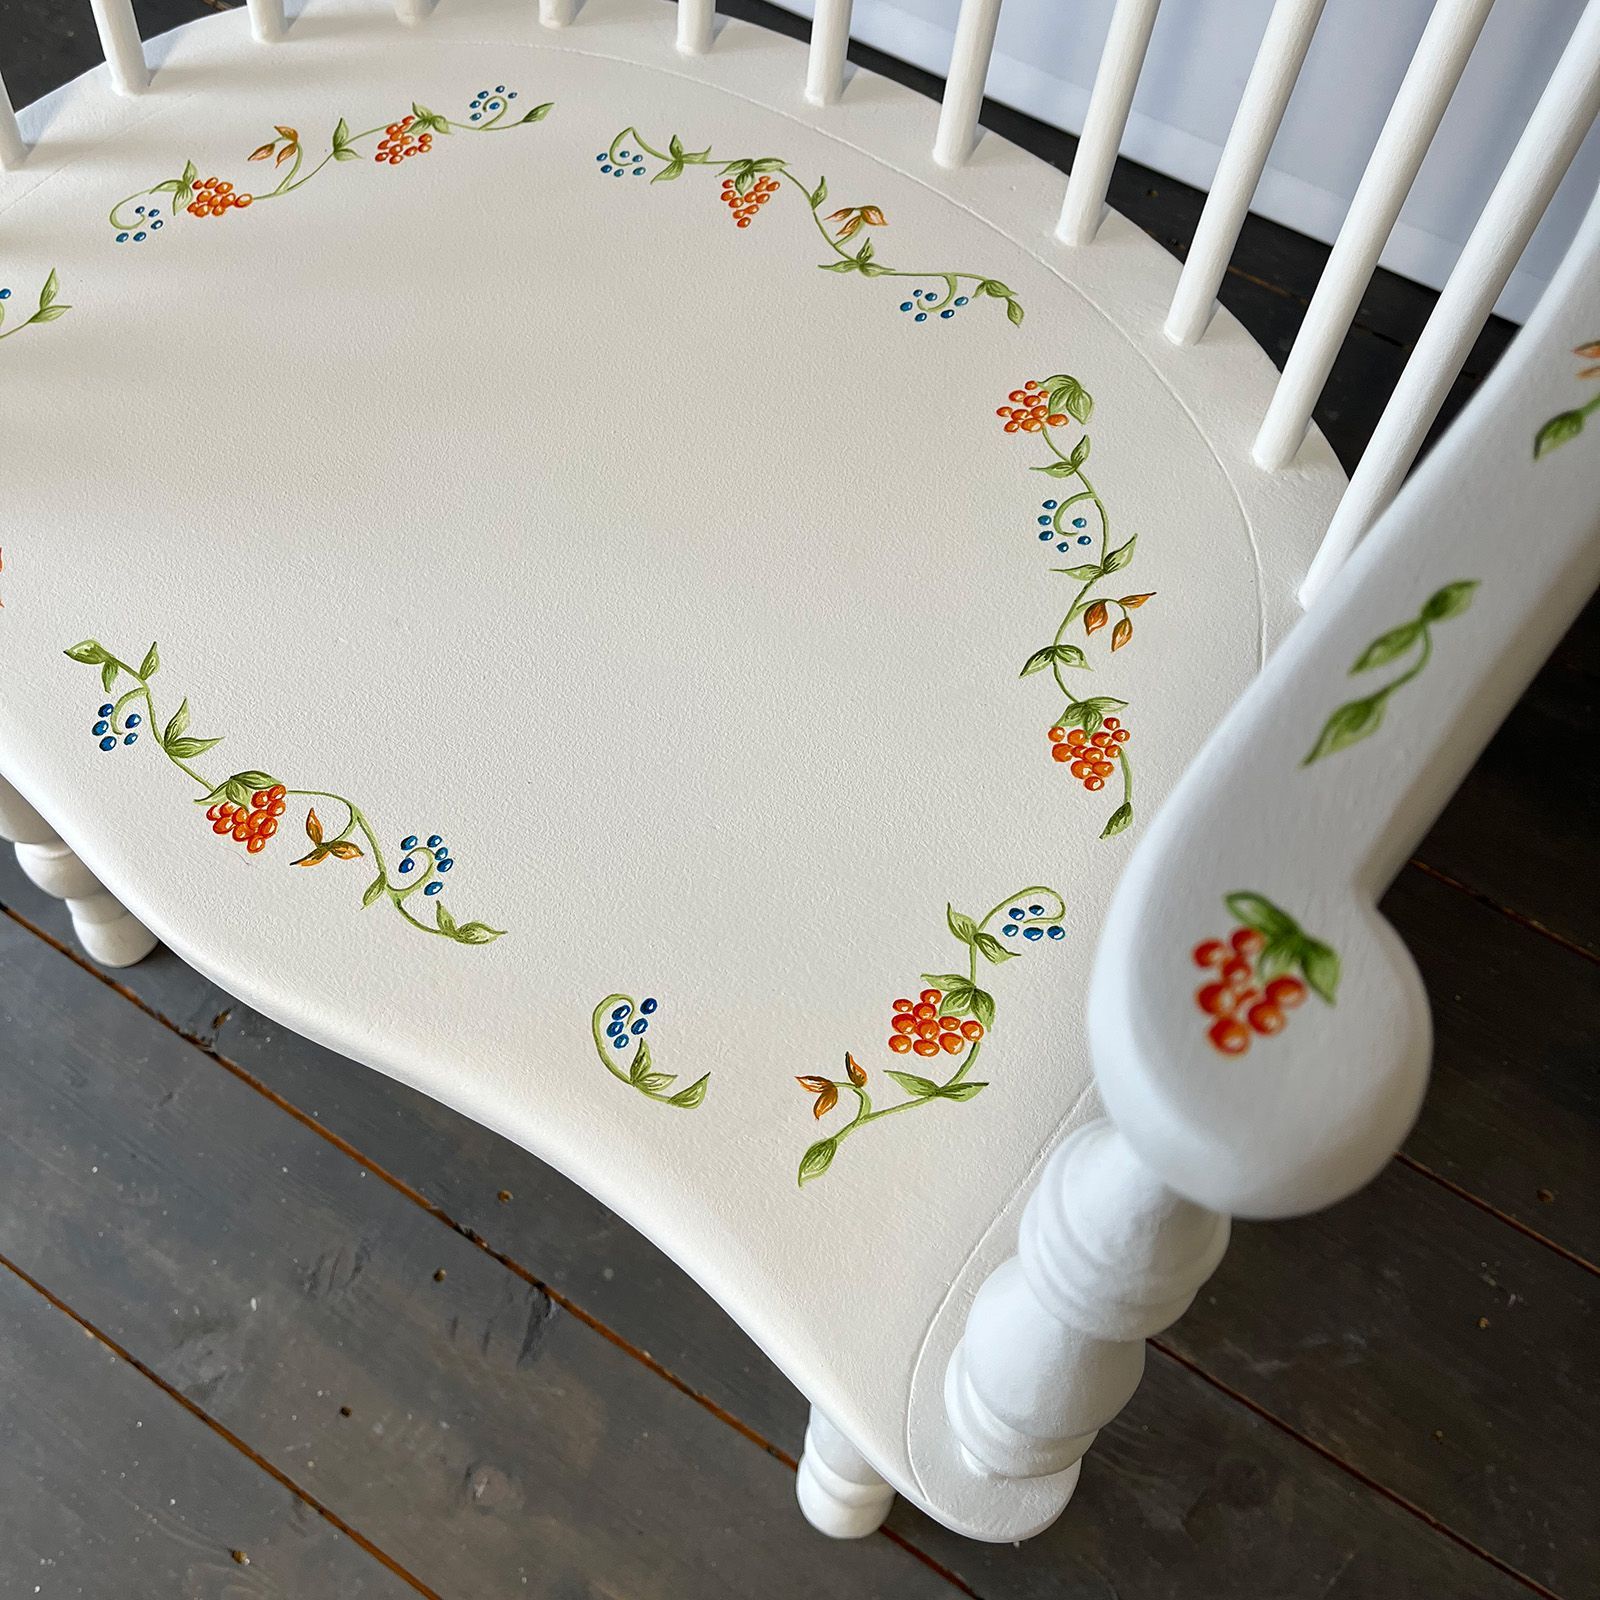 Detail of berry design on upcycled Windsor chair